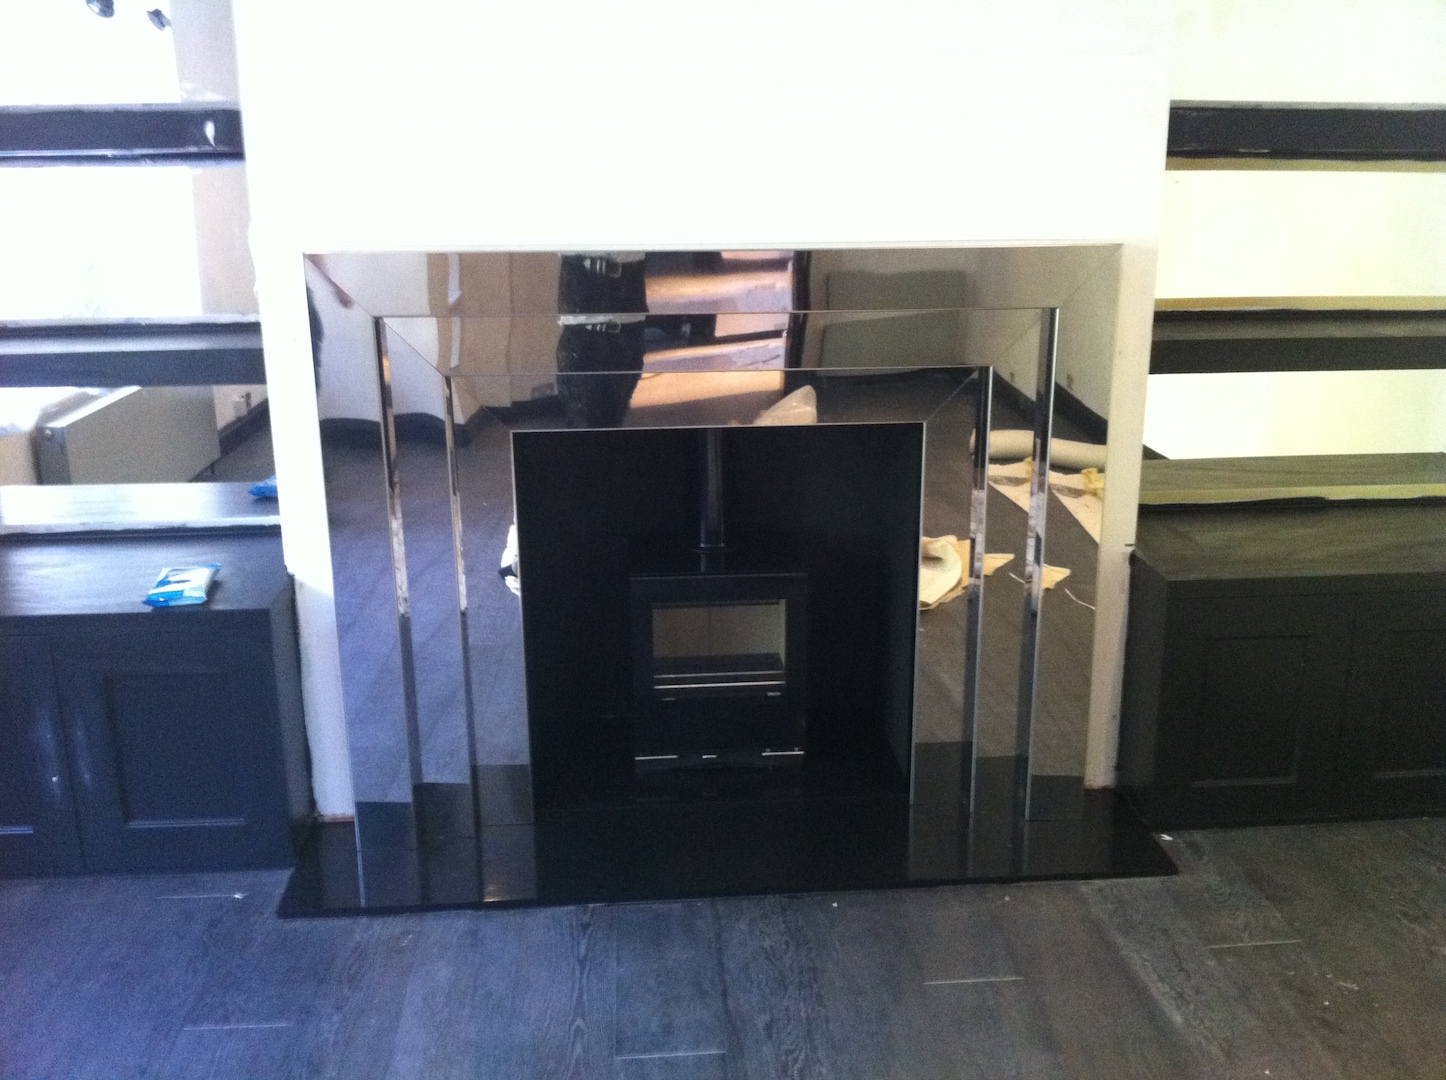 Highly polished Stainless Steel fire surround